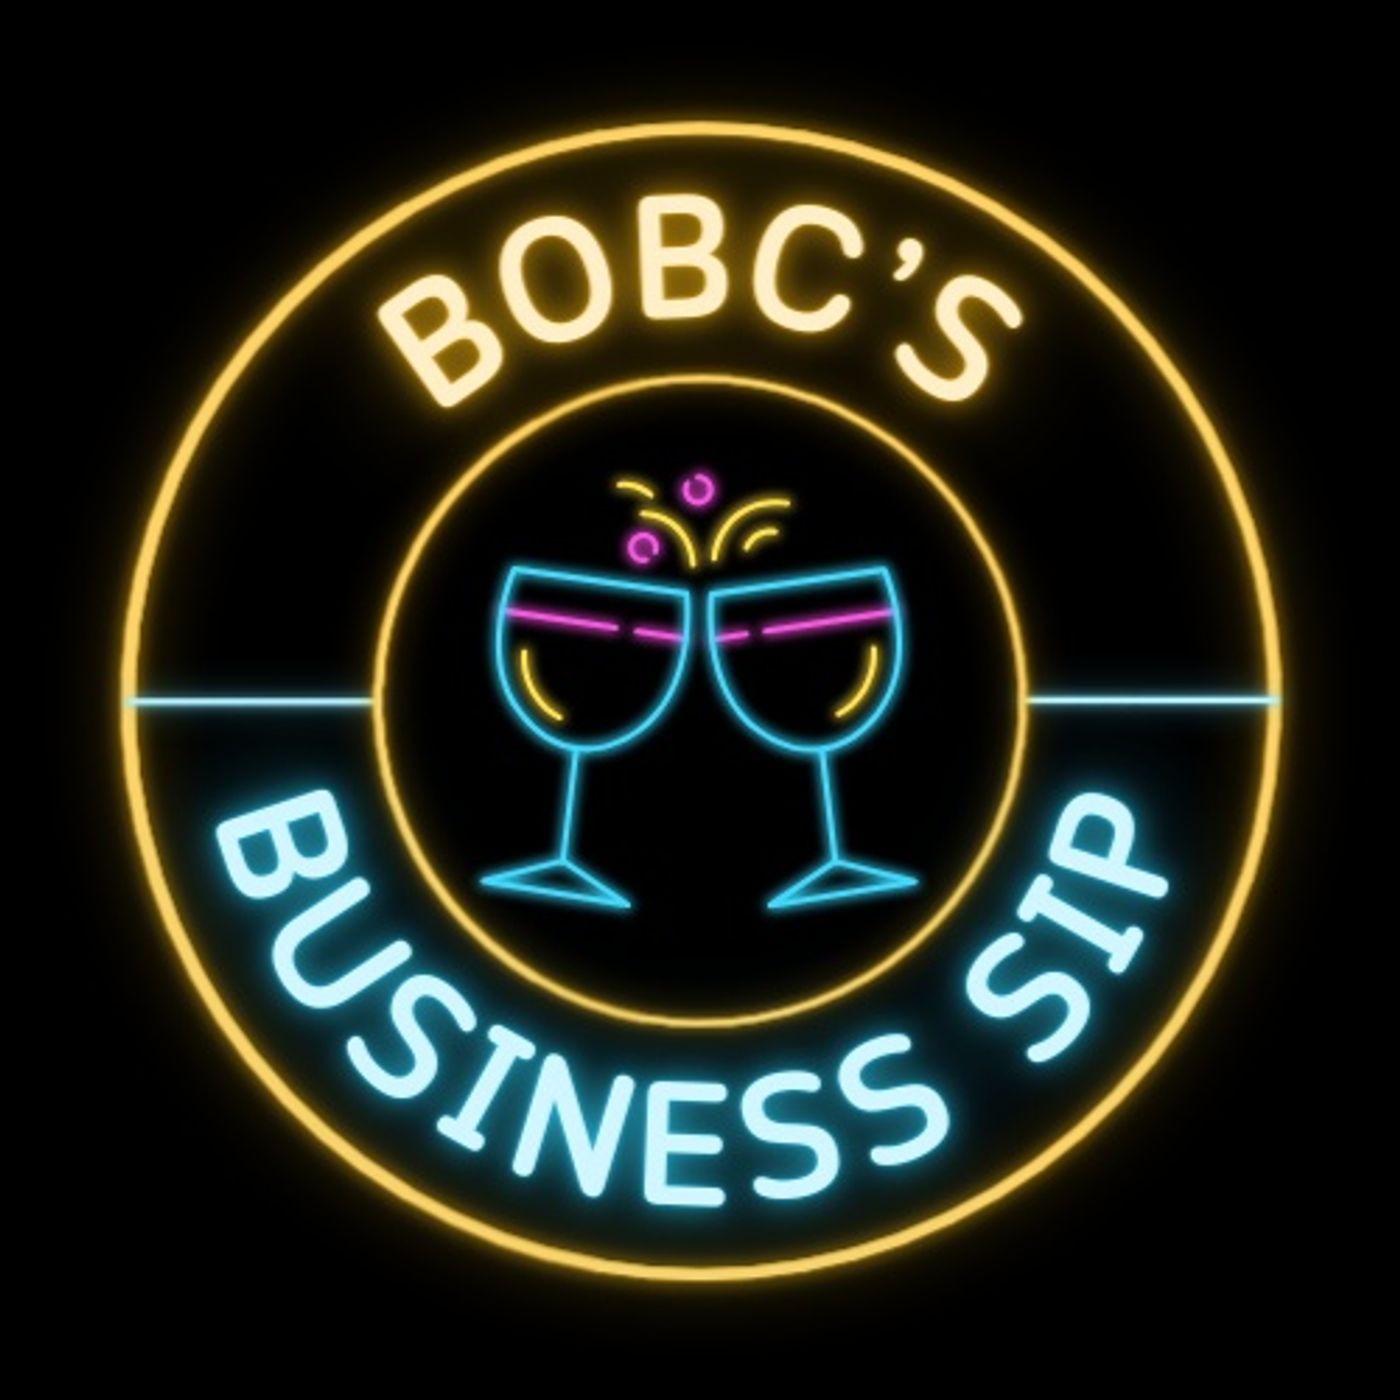 The BOBC Business Sip Image